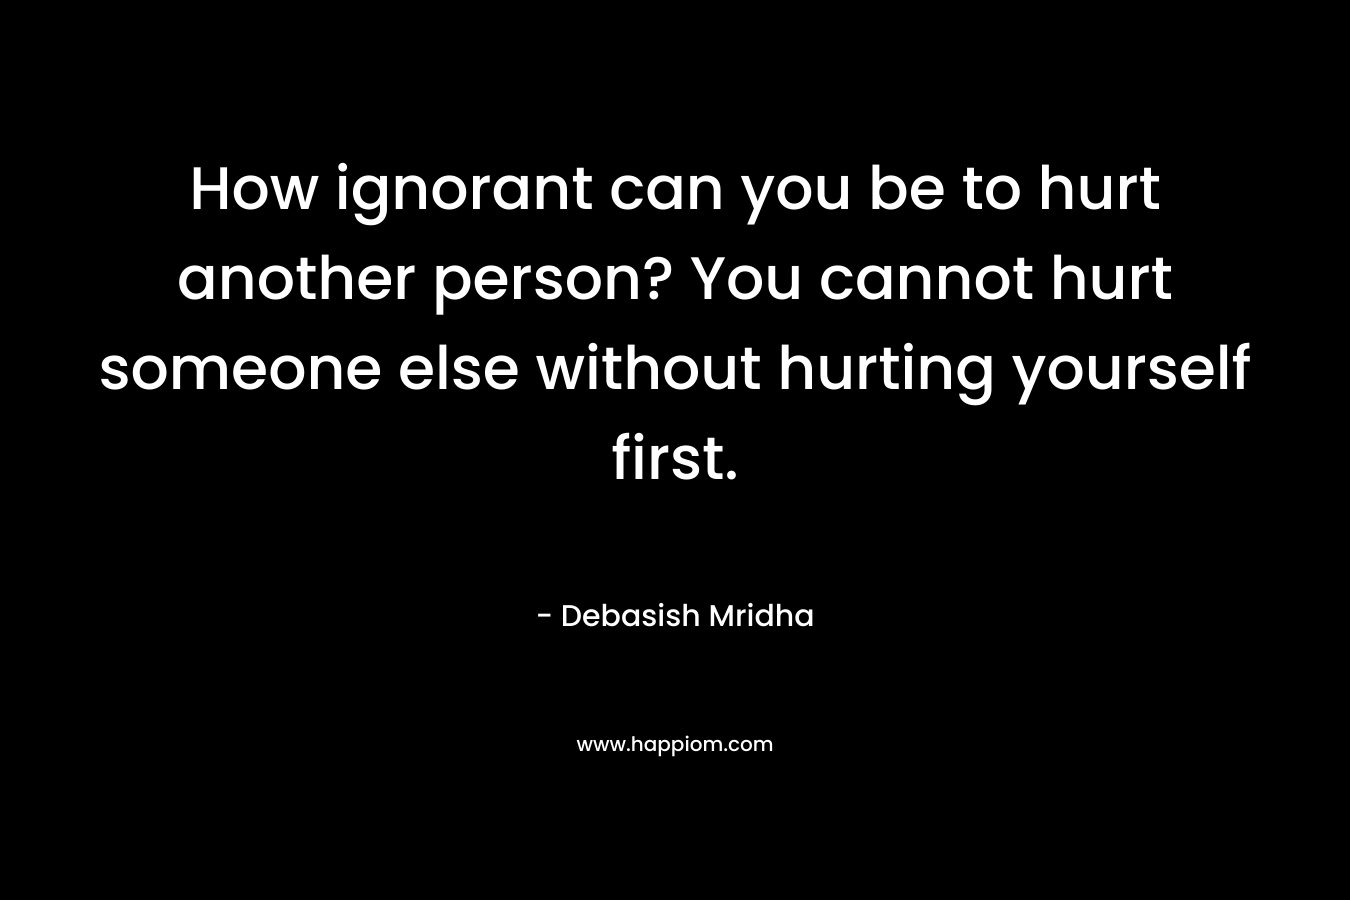 How ignorant can you be to hurt another person? You cannot hurt someone else without hurting yourself first.